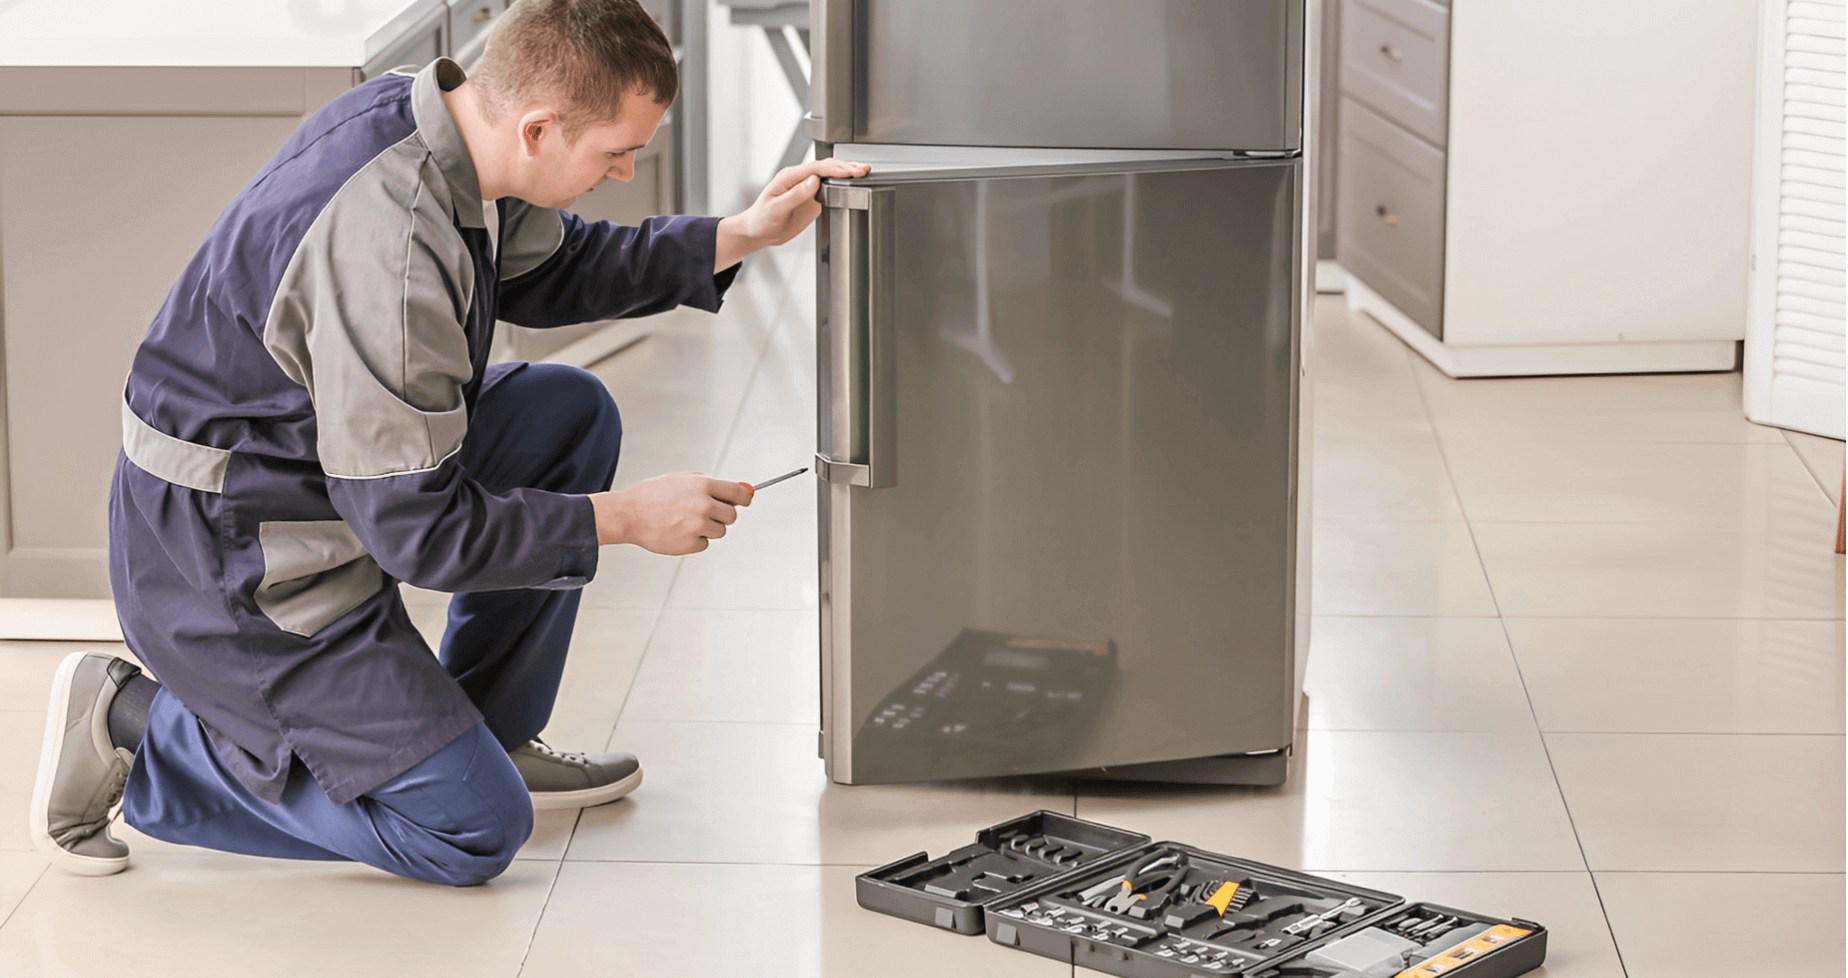 What Is The Refrigerator Replacement Process?